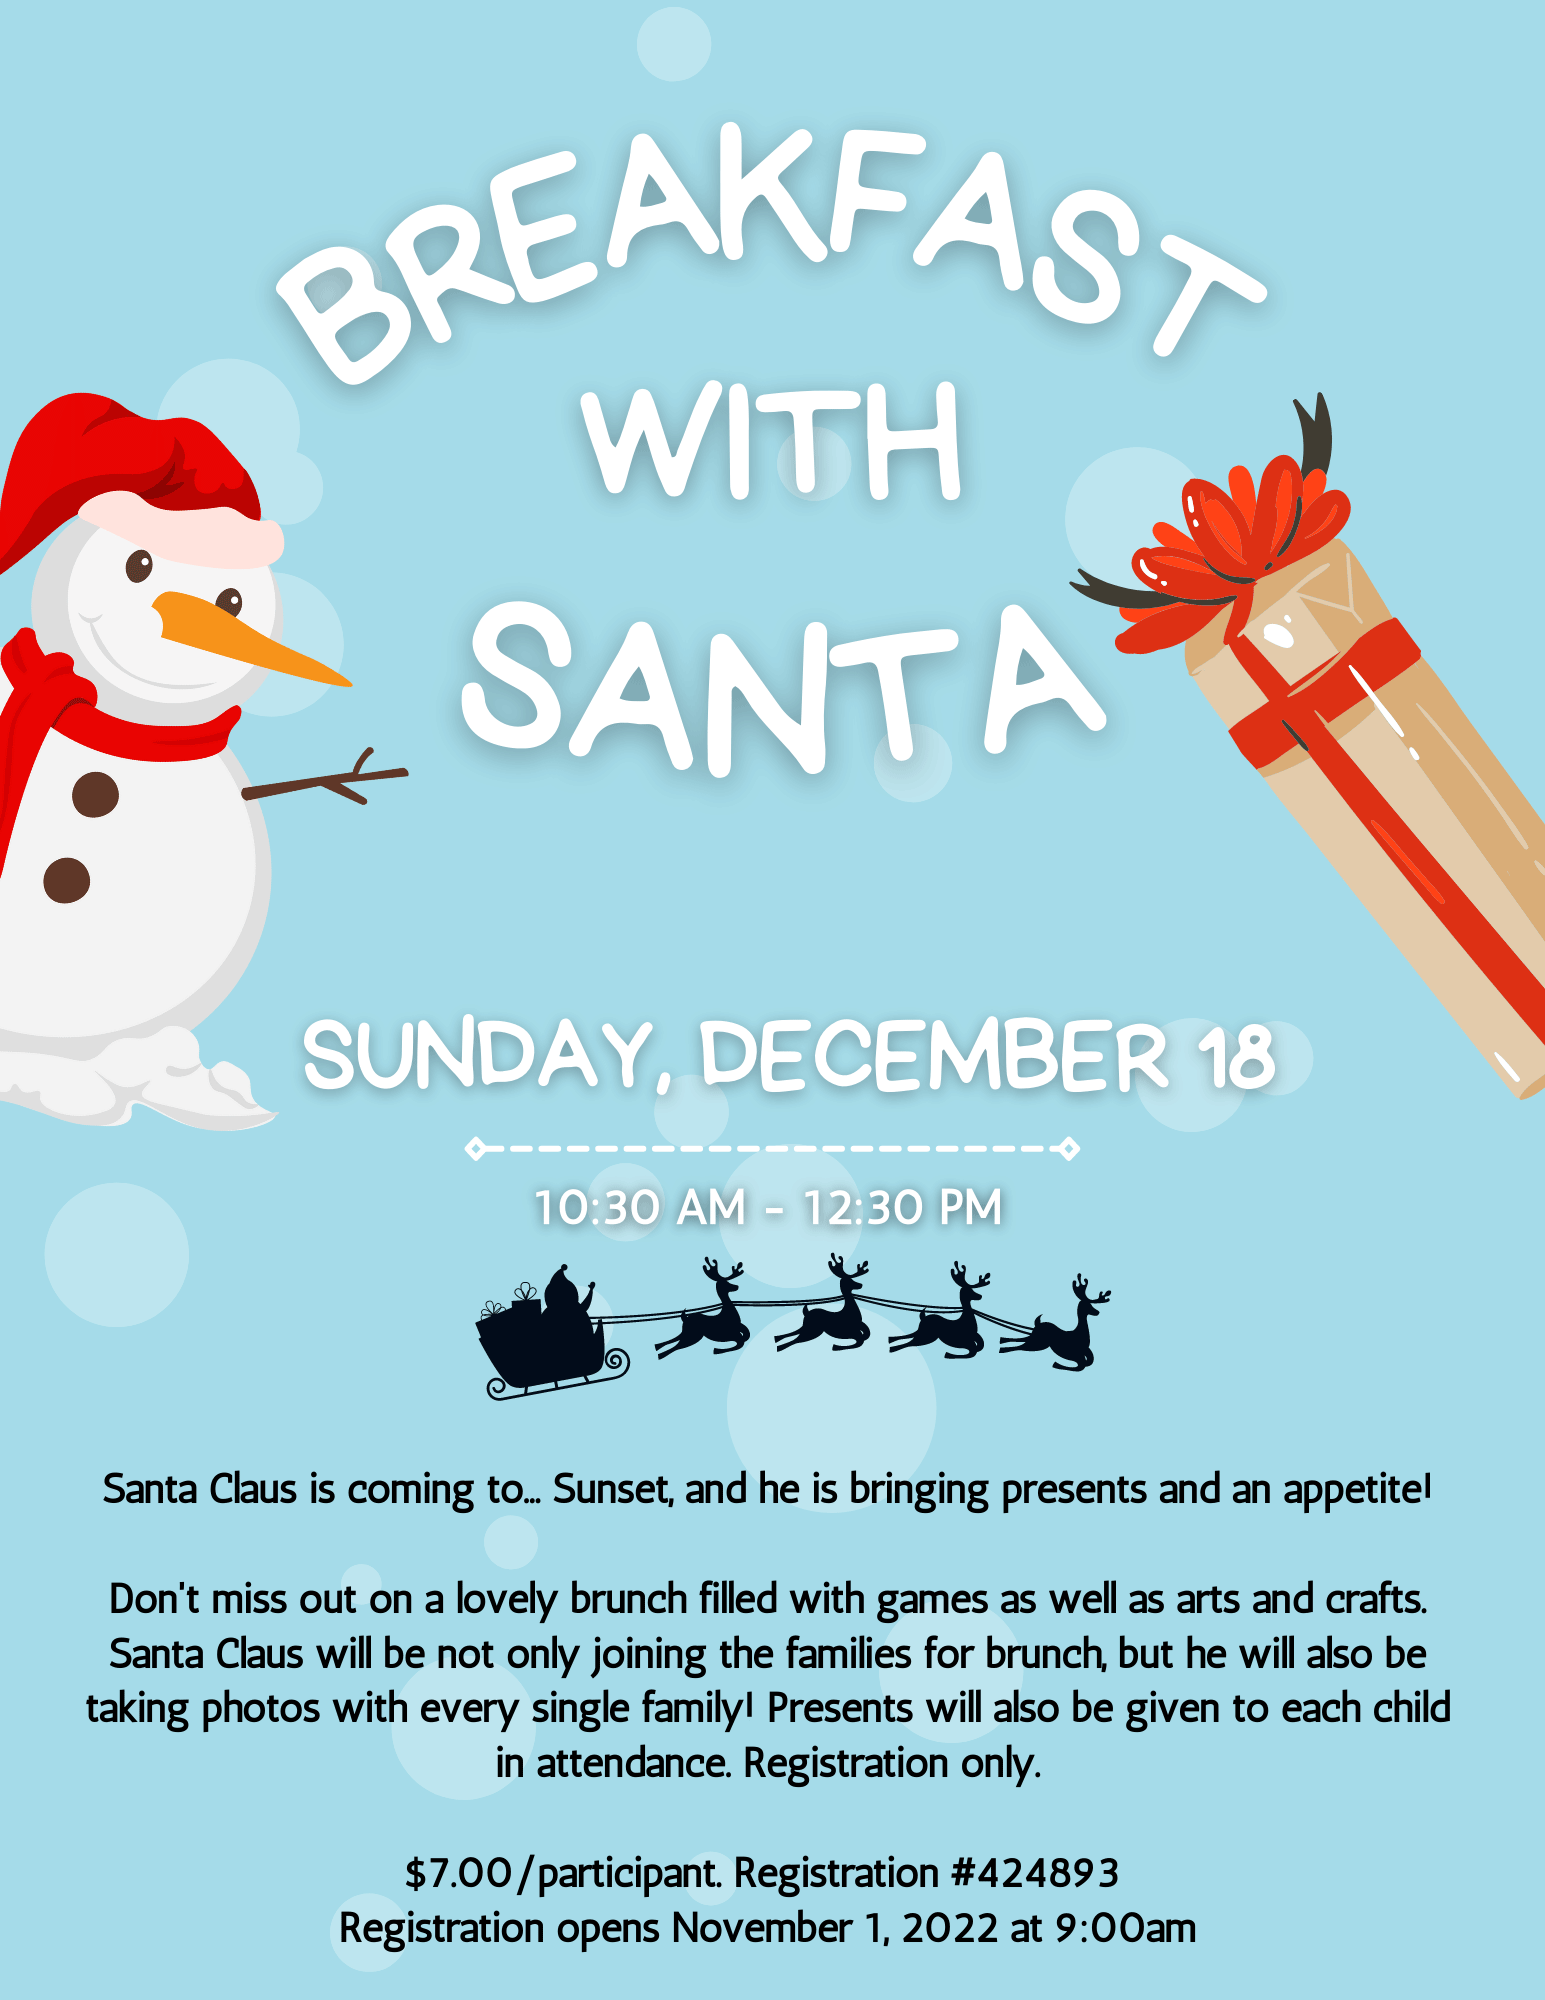 Breakfast with Santa Sunday, December 18. Santa Claus is coming to... Sunset, and he is bringing Presents and an appetite! Don't miss out on a lovely brunch filled with games as well as arts and crafts. Santa Claus will be not only joining the families for brunch, but he will also be taking photos with every single family! Presents will also be given to each child in attendance. Please note the event will be by Registration only. Registration opens November 1 All participants must be registered, $7.00 a Participant.